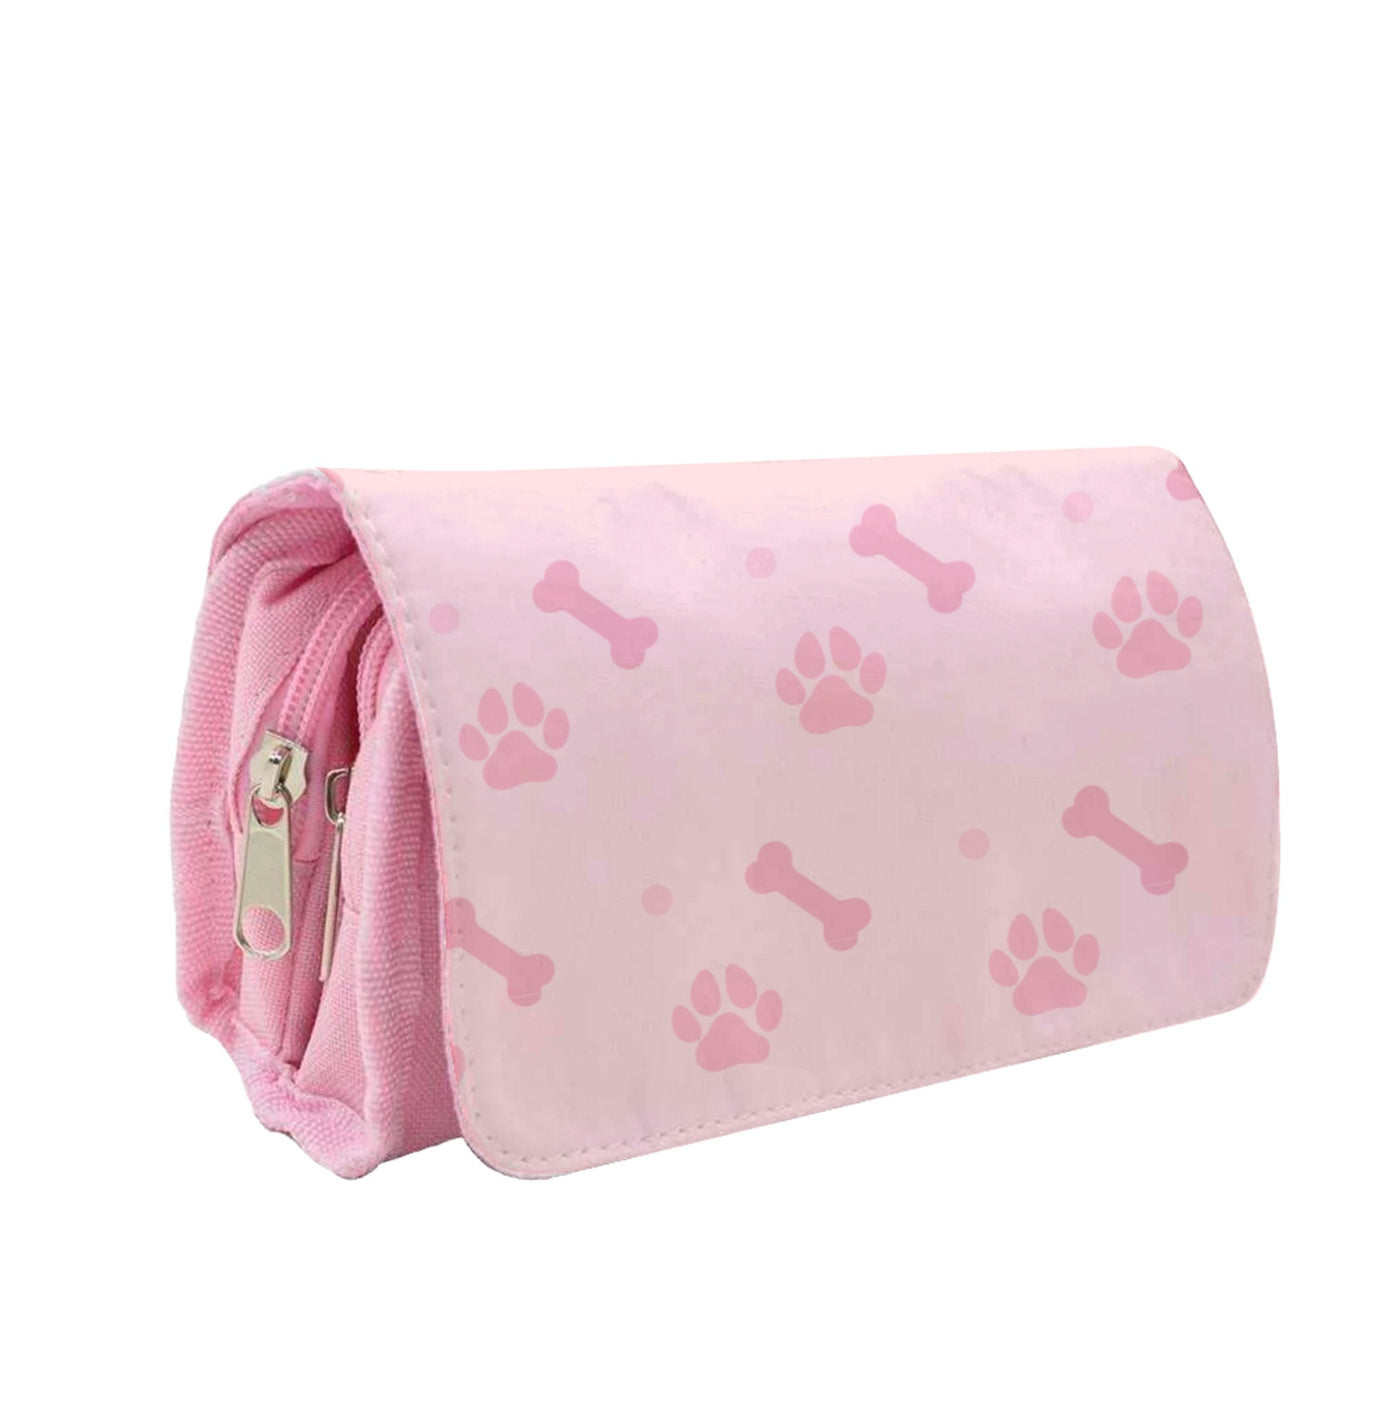 Dog And Paw - Dog Pattern Pencil Case